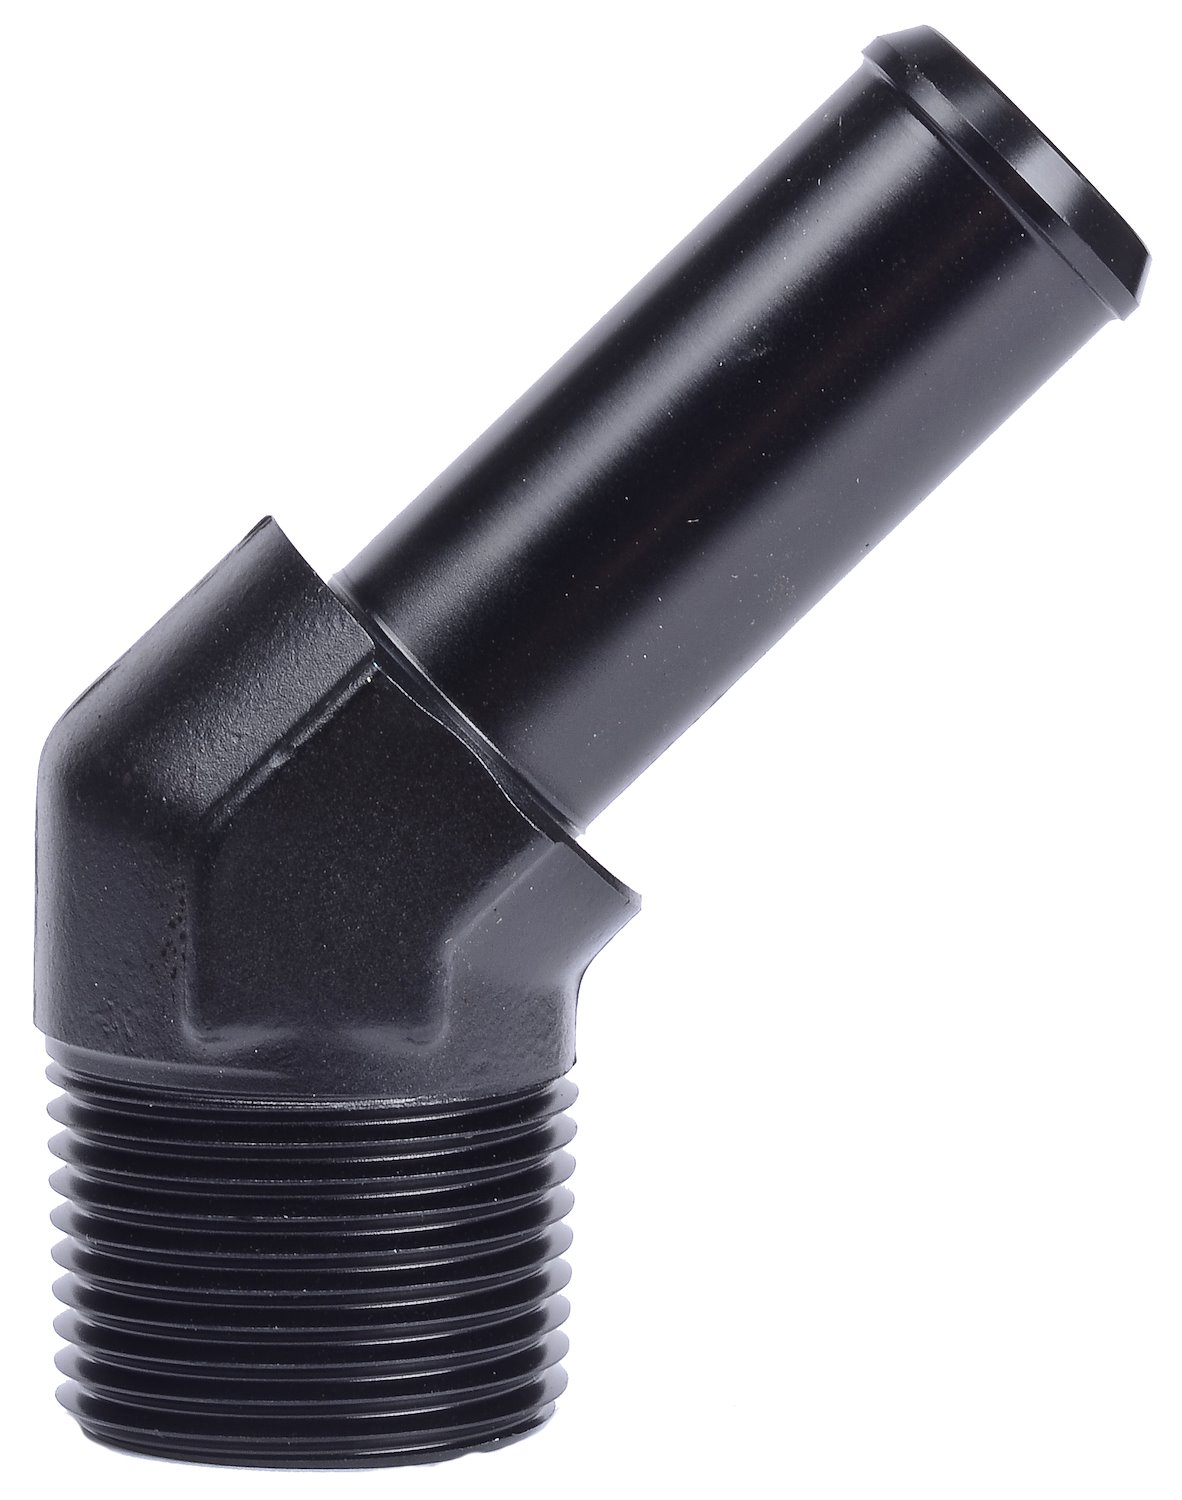 NPT to Hose Barb Fitting, 45-Degree [3/4 in. NPT Male to 3/4 in. I.D. Hose, Black]